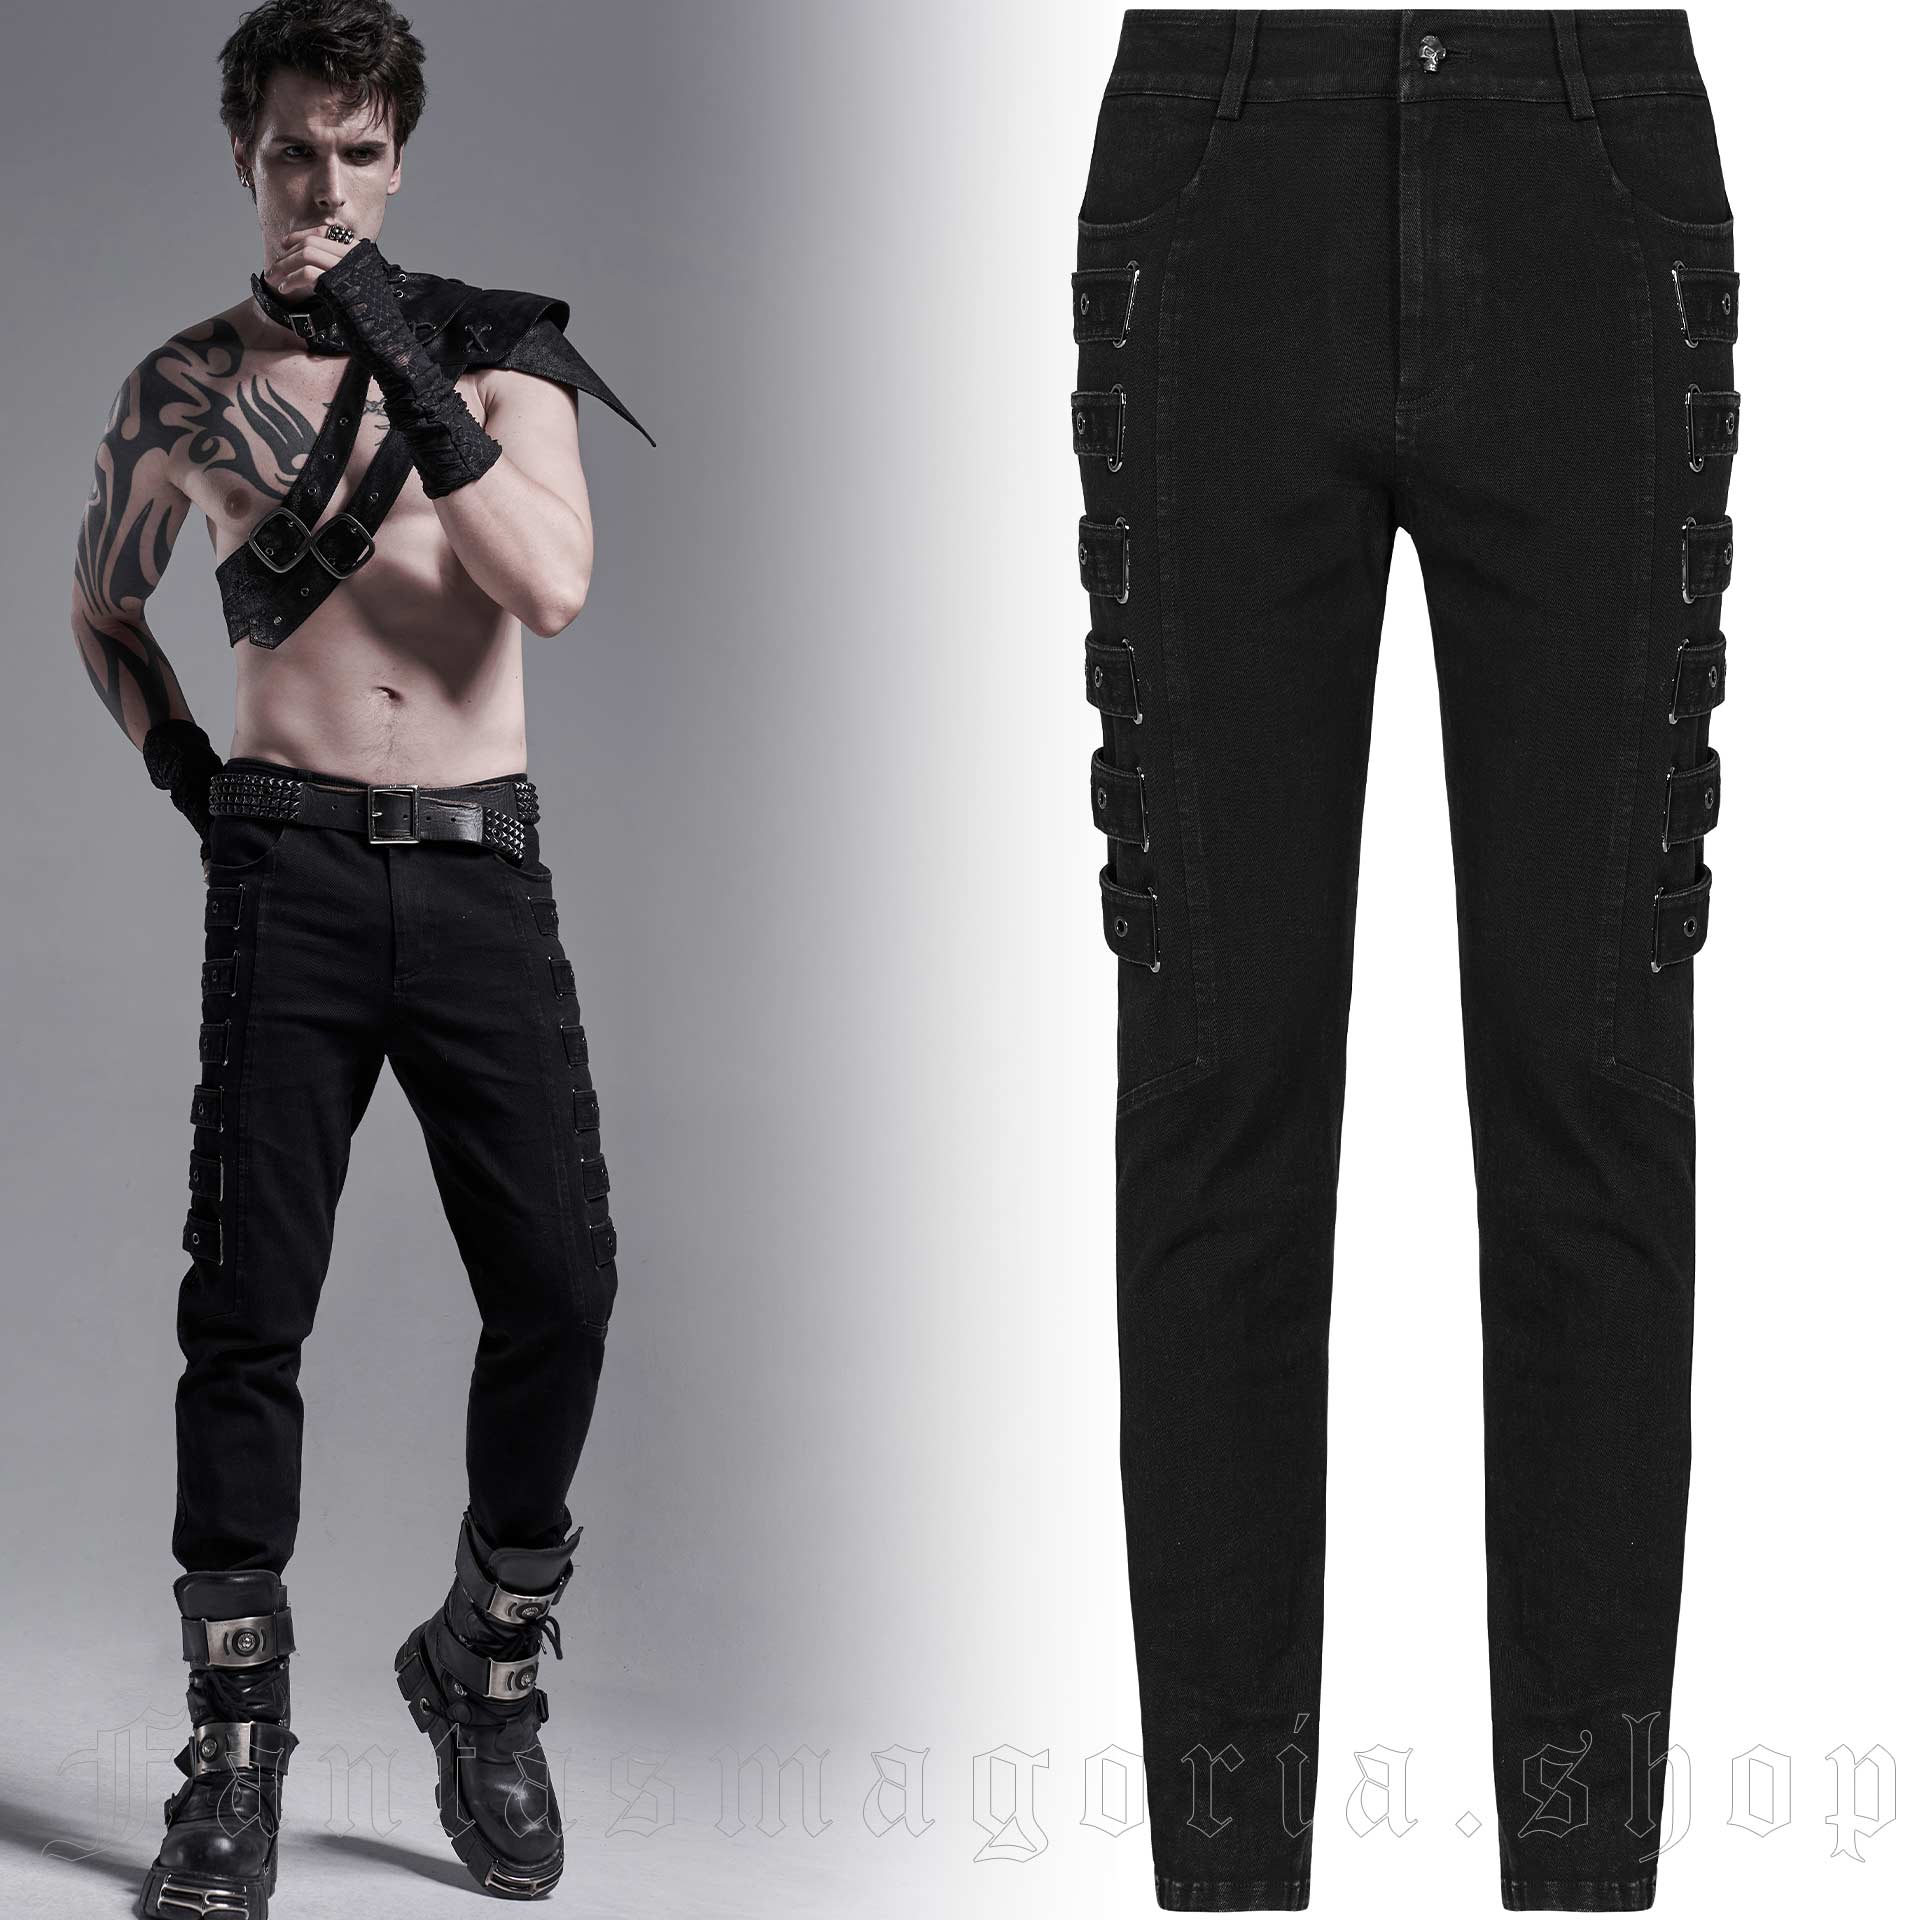 Nephilim Trousers Punk Rave WK-451 1